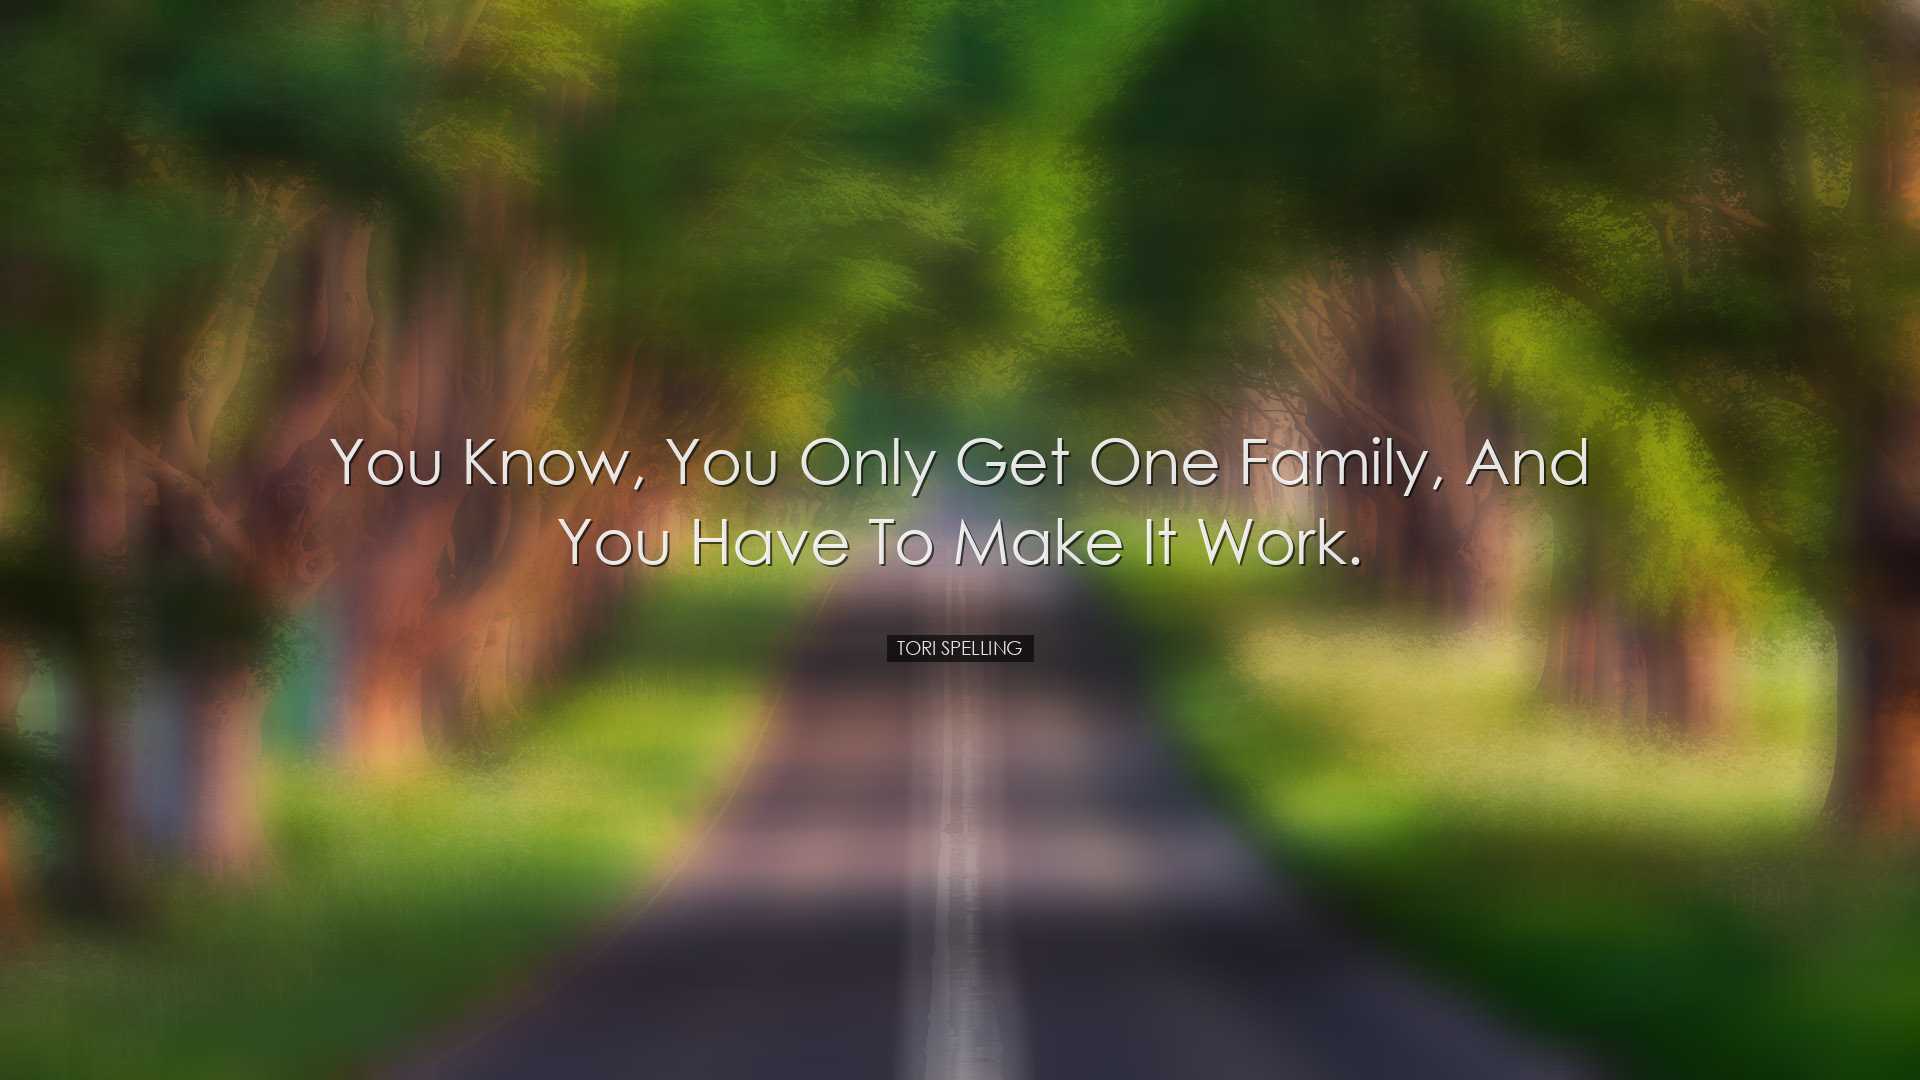 You know, you only get one family, and you have to make it work. -